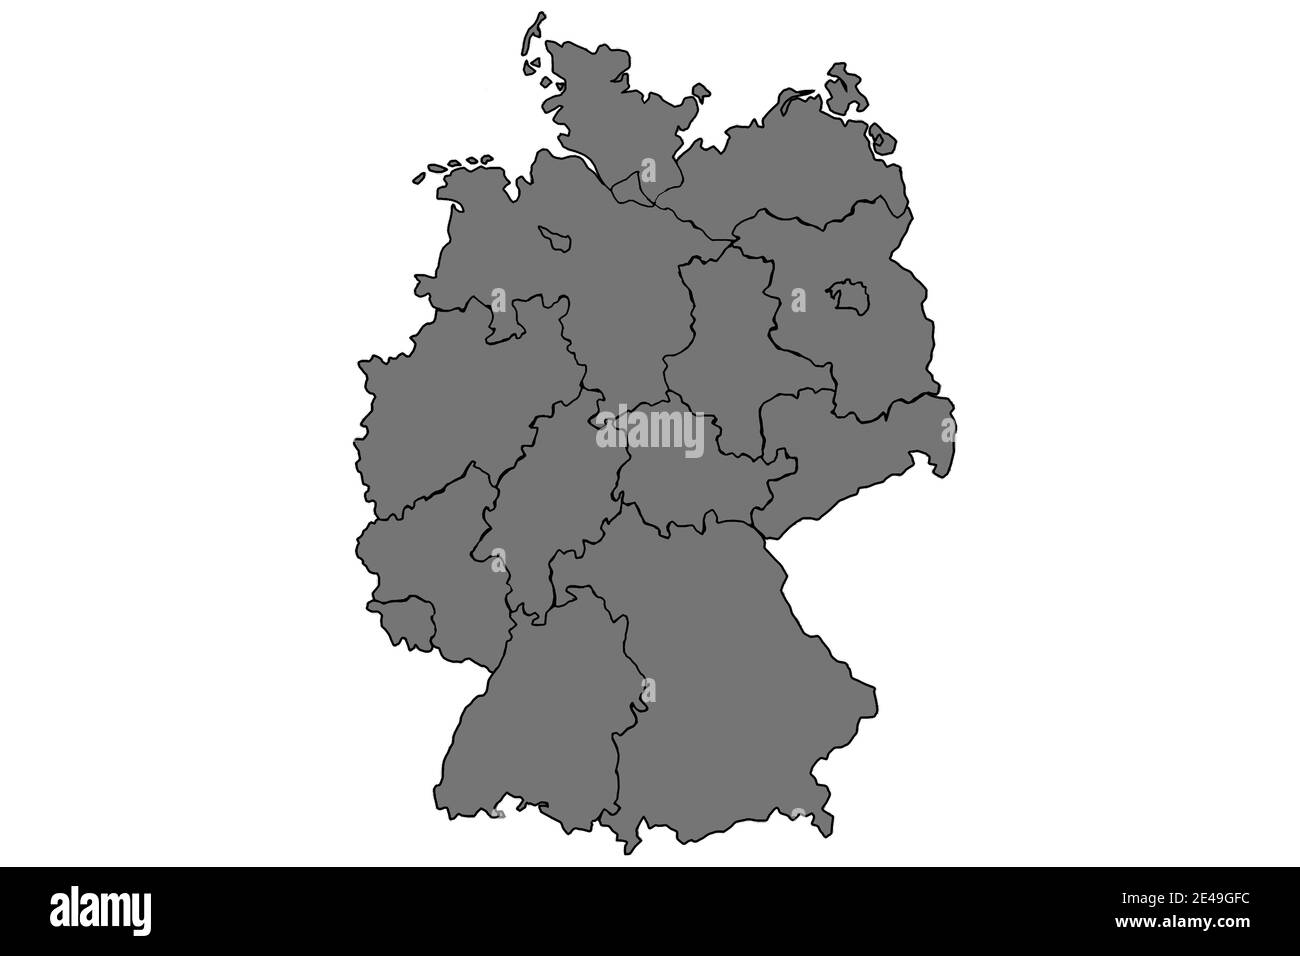 Germany map and federal states map vector gray Stock Photo